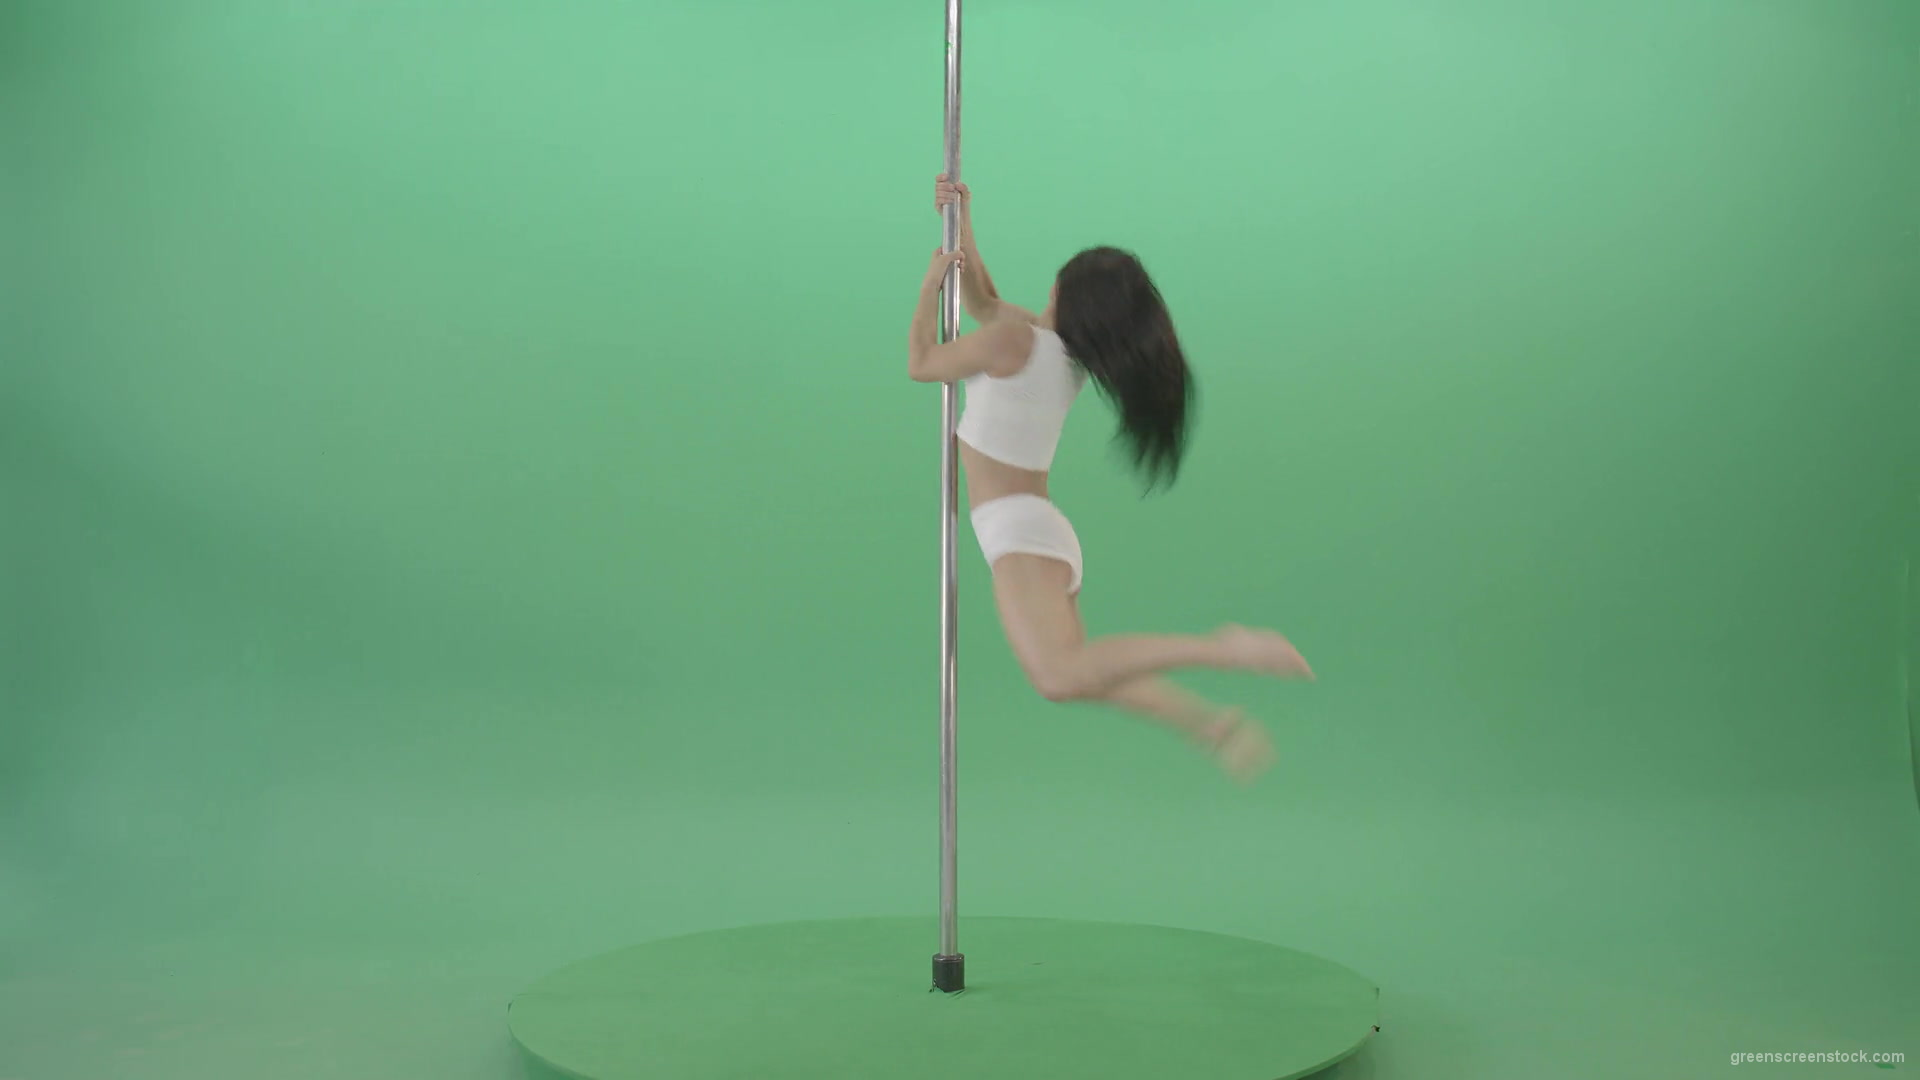 Green-Screen-Woman-spinning-gracefully-on-pole-dance-Video-Footage-1920_002 Green Screen Stock